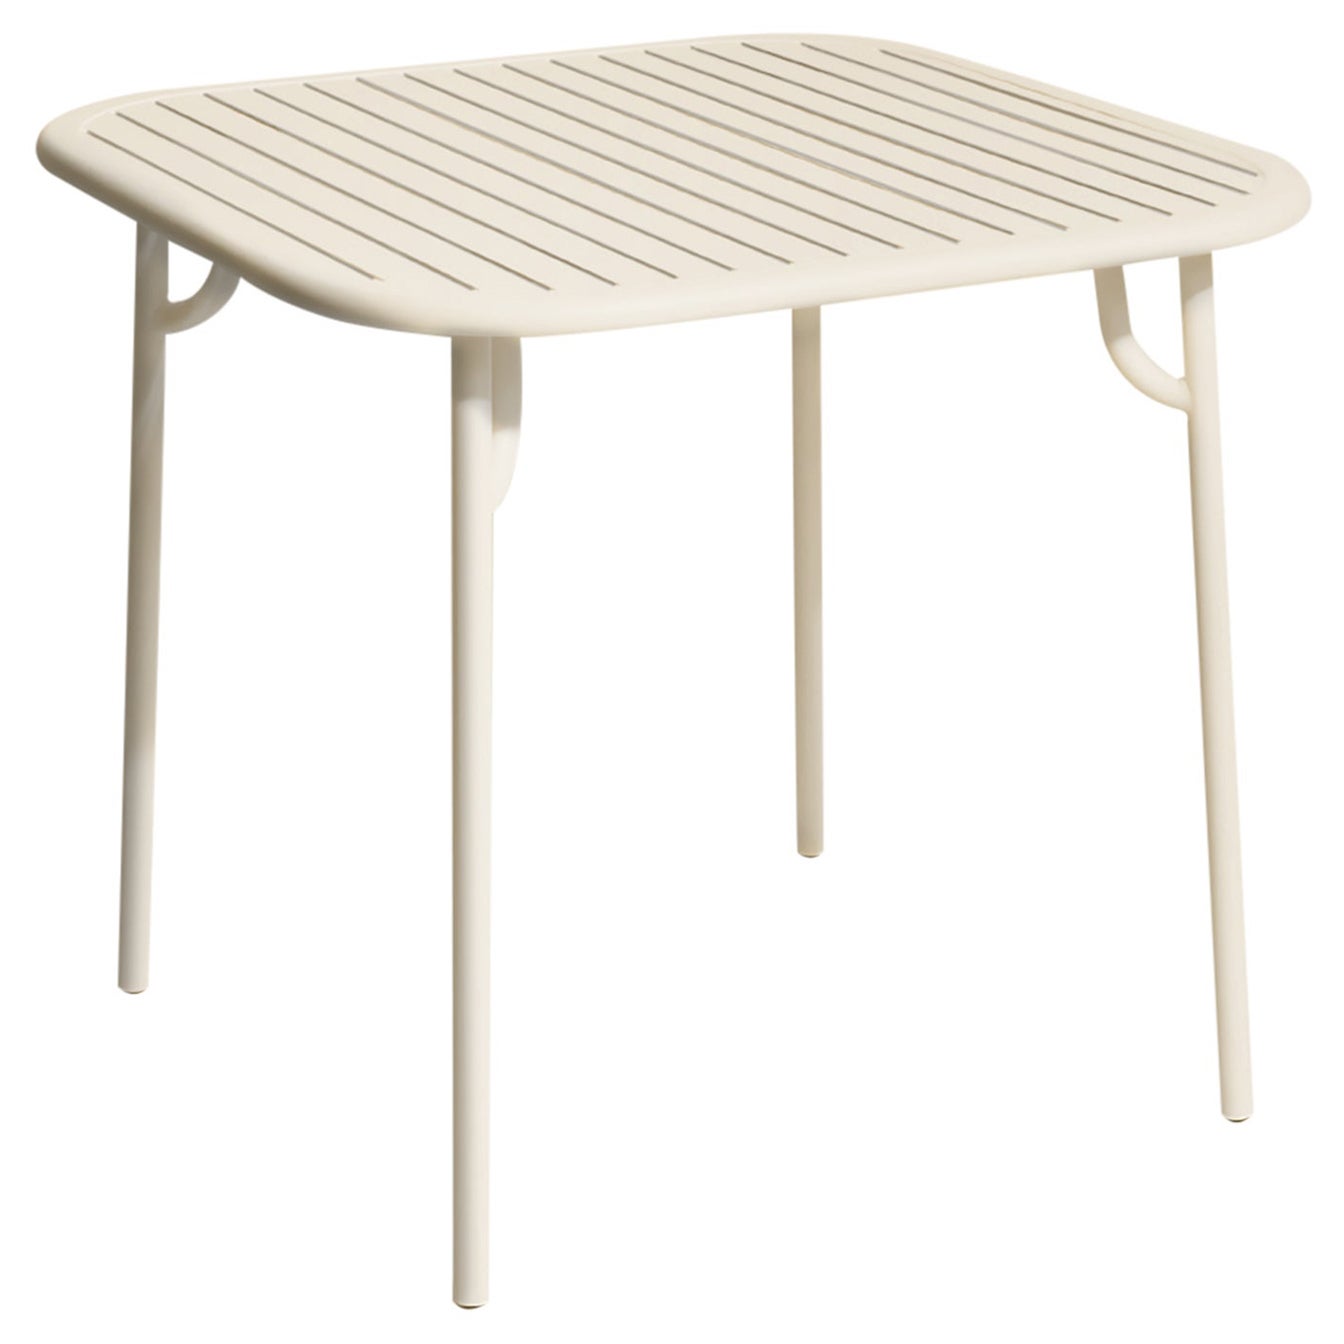 Petite Friture Week-End Square Dining Table in Ivory Aluminium with Slats